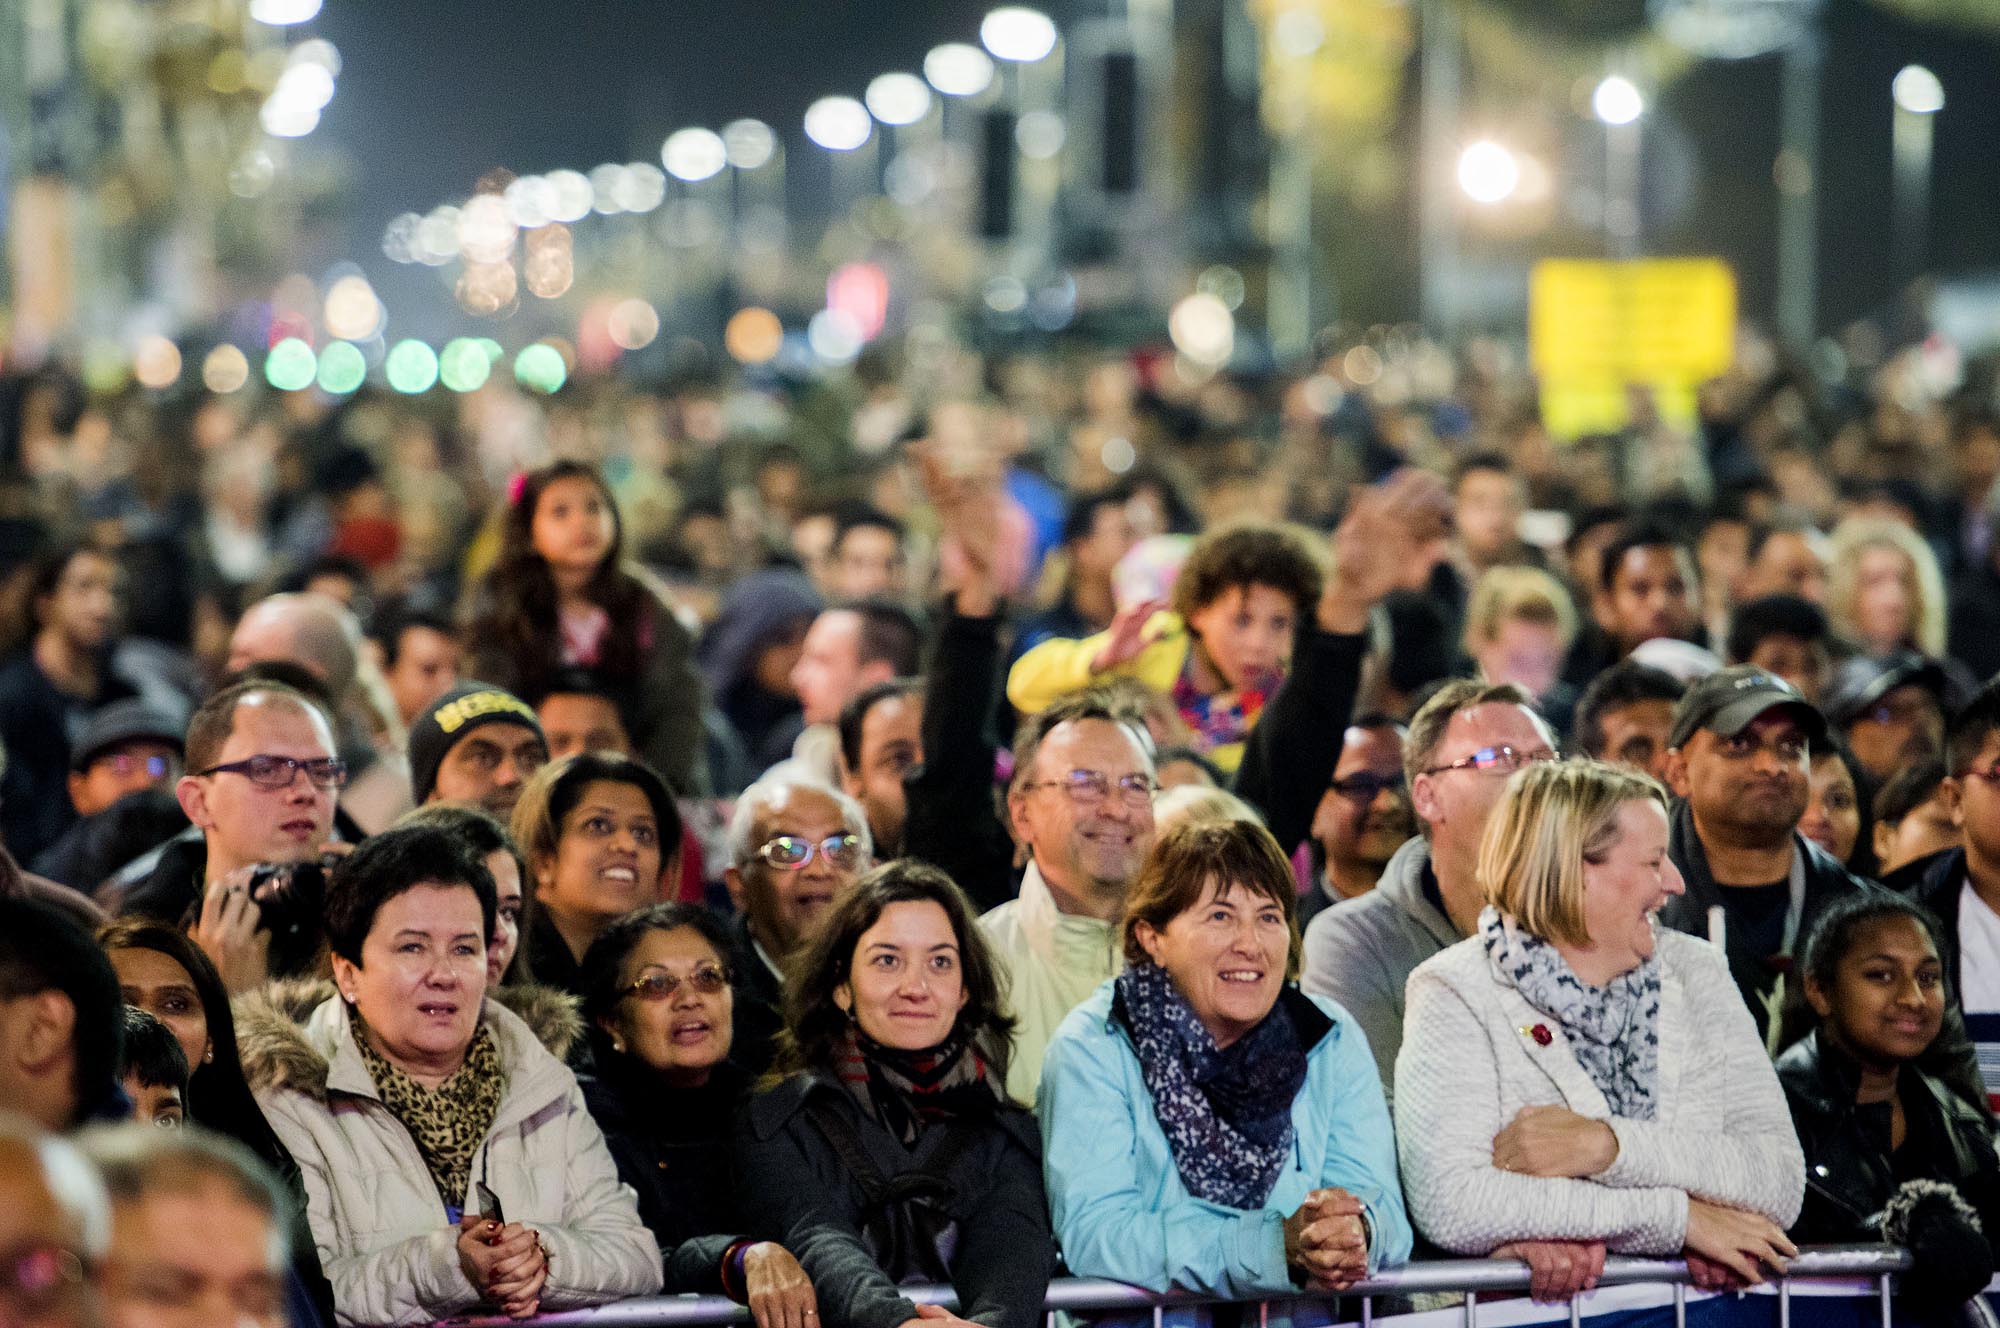 Today Leicester’s Diwali Lights attract a diverse range of people to Leicester - 